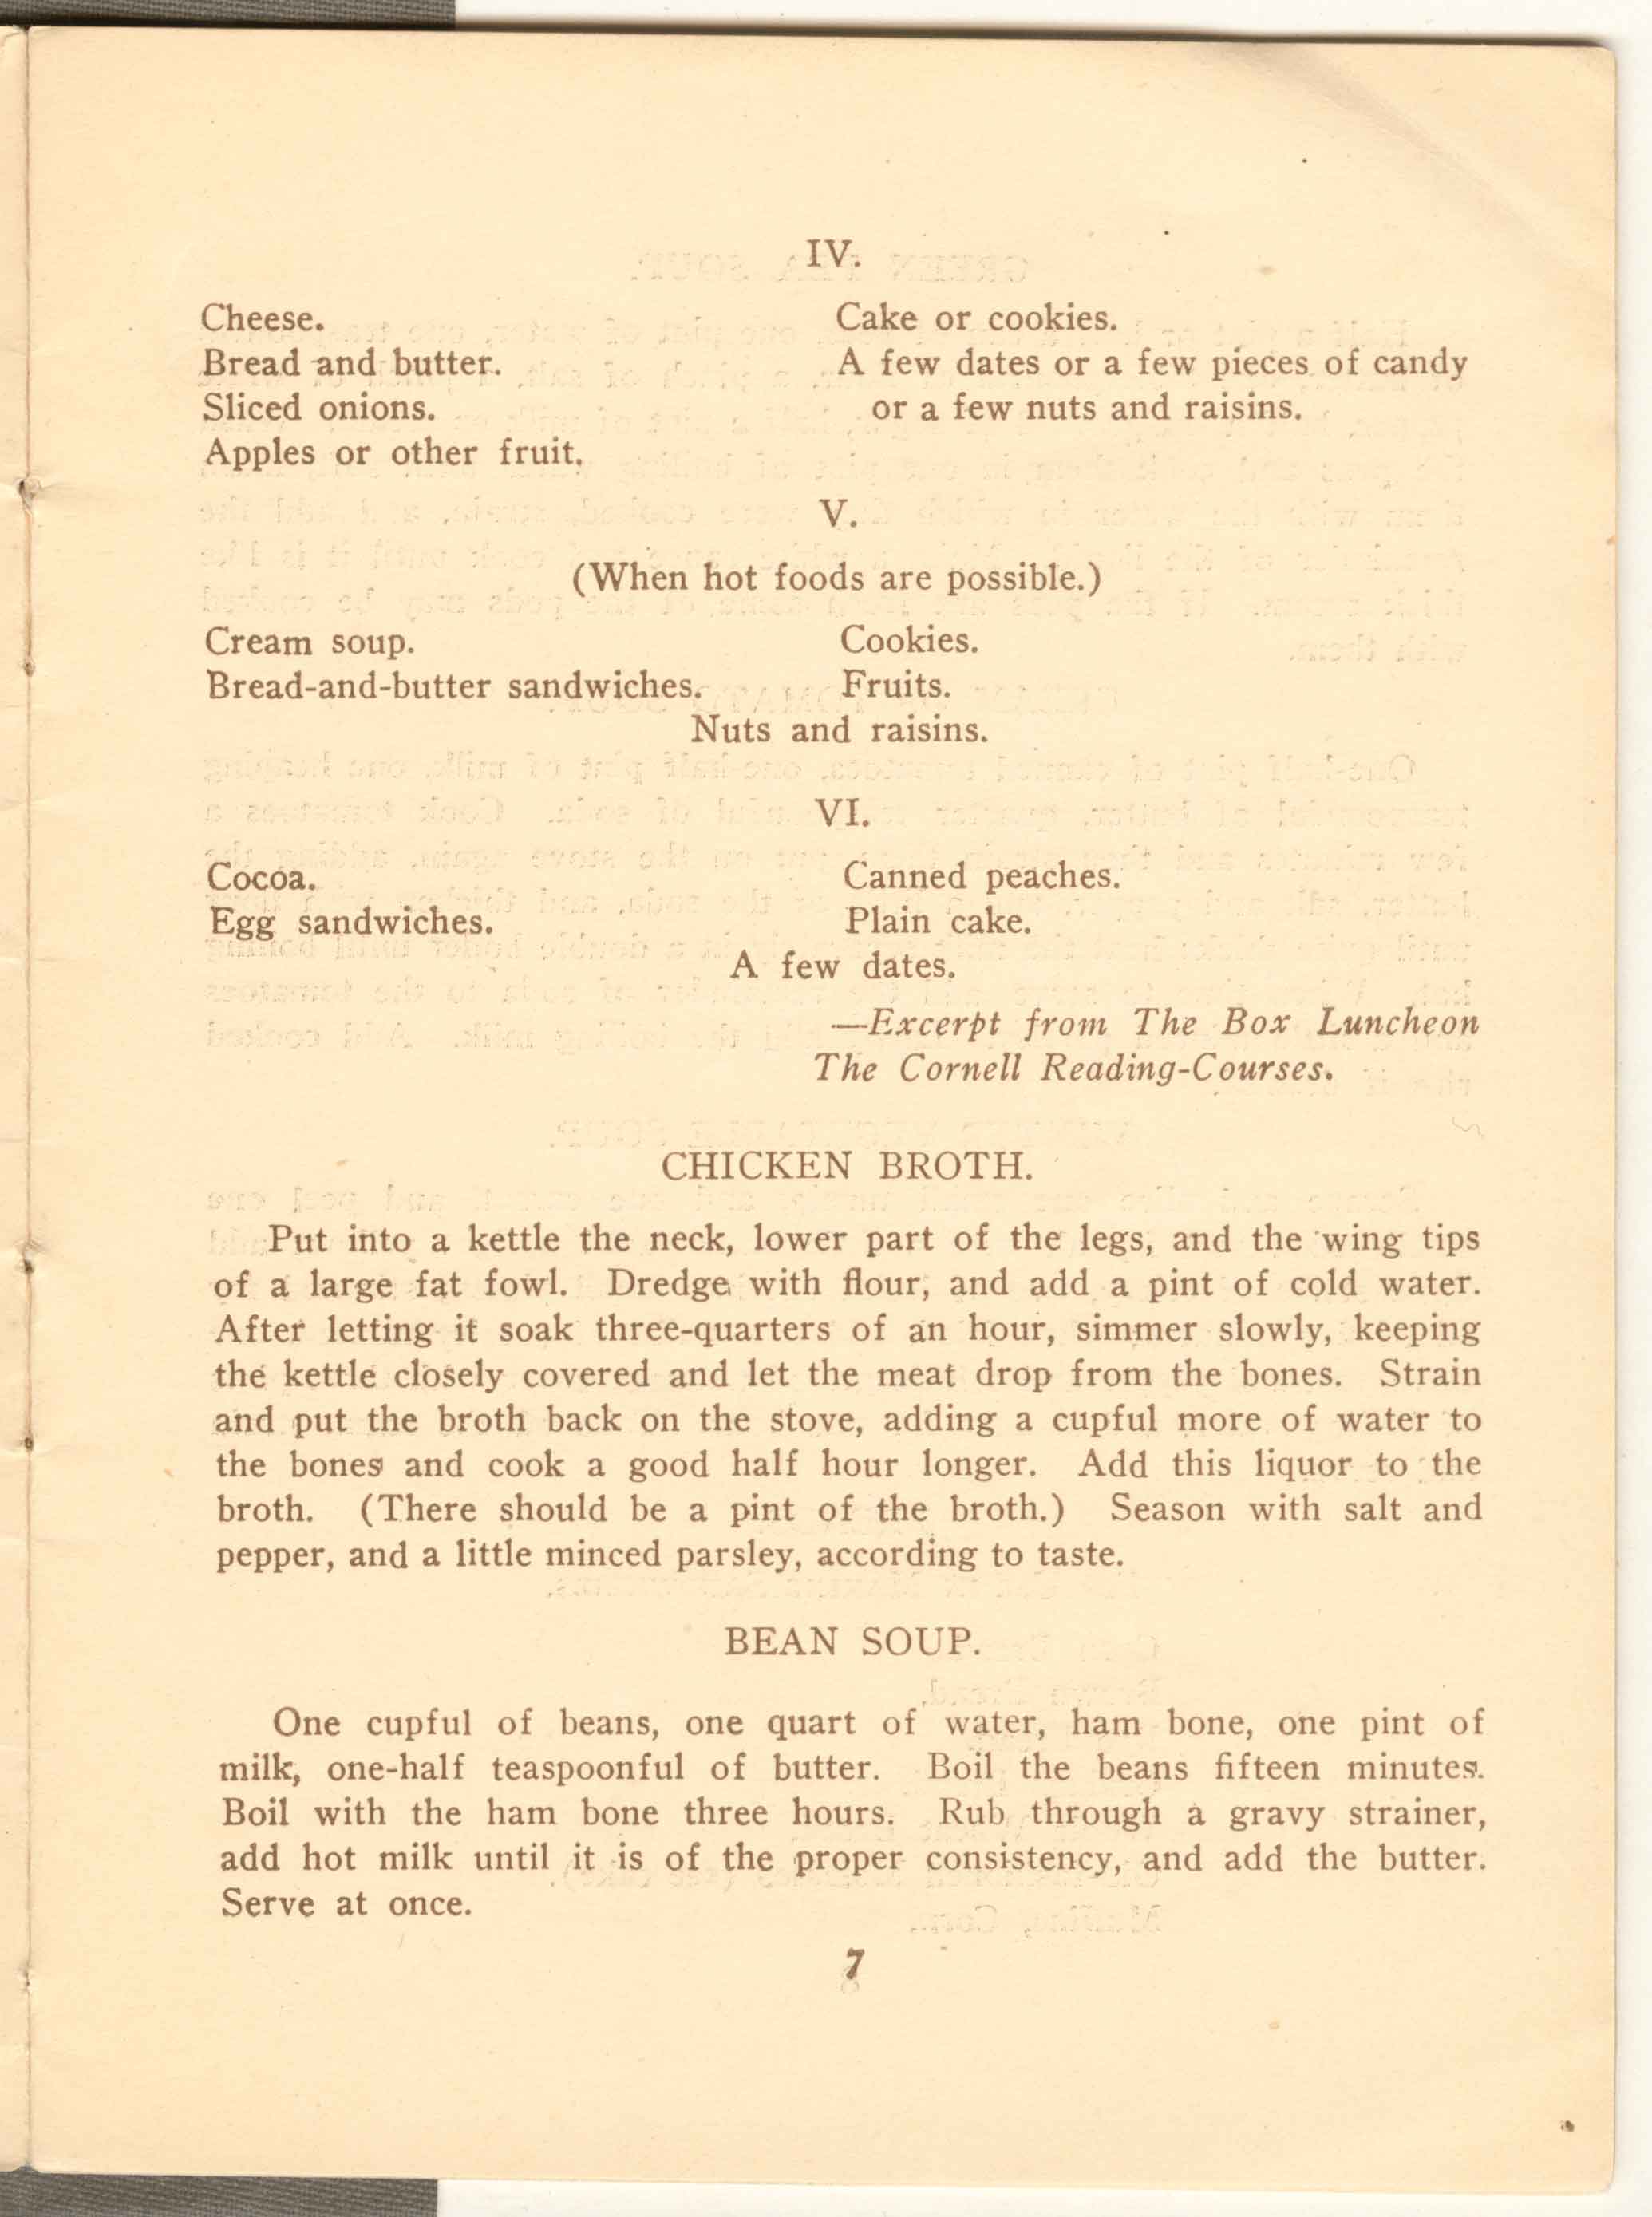 Page from a Keep Well Leaflet from the New York City Department of Health published circa 1920 titled Simple Wholesome Lunches for Working People.